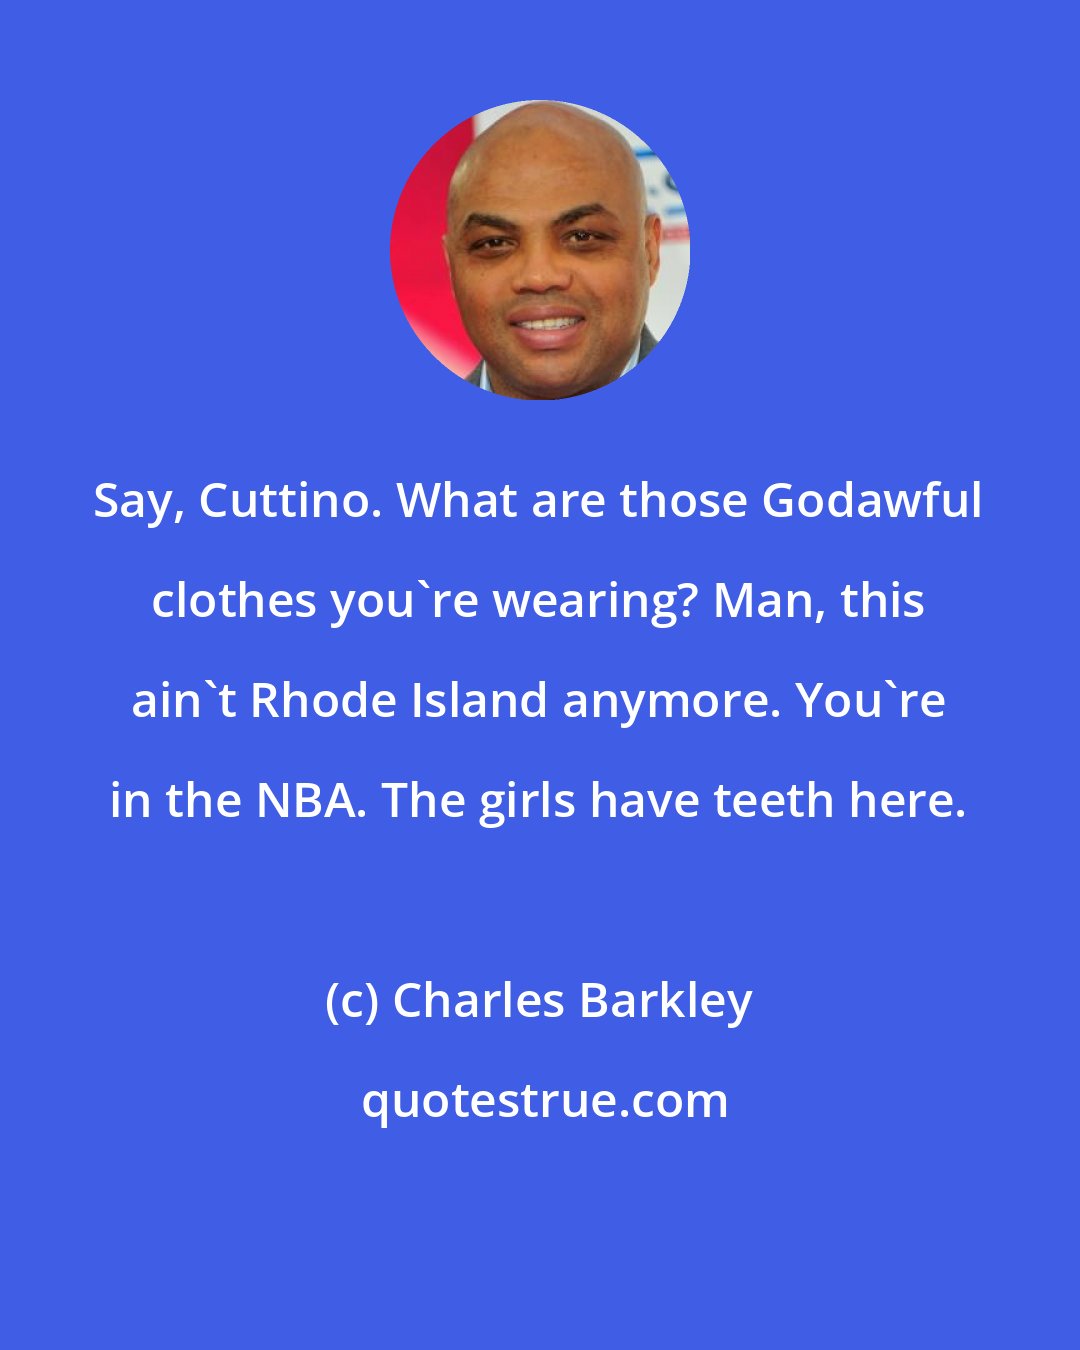 Charles Barkley: Say, Cuttino. What are those Godawful clothes you're wearing? Man, this ain't Rhode Island anymore. You're in the NBA. The girls have teeth here.